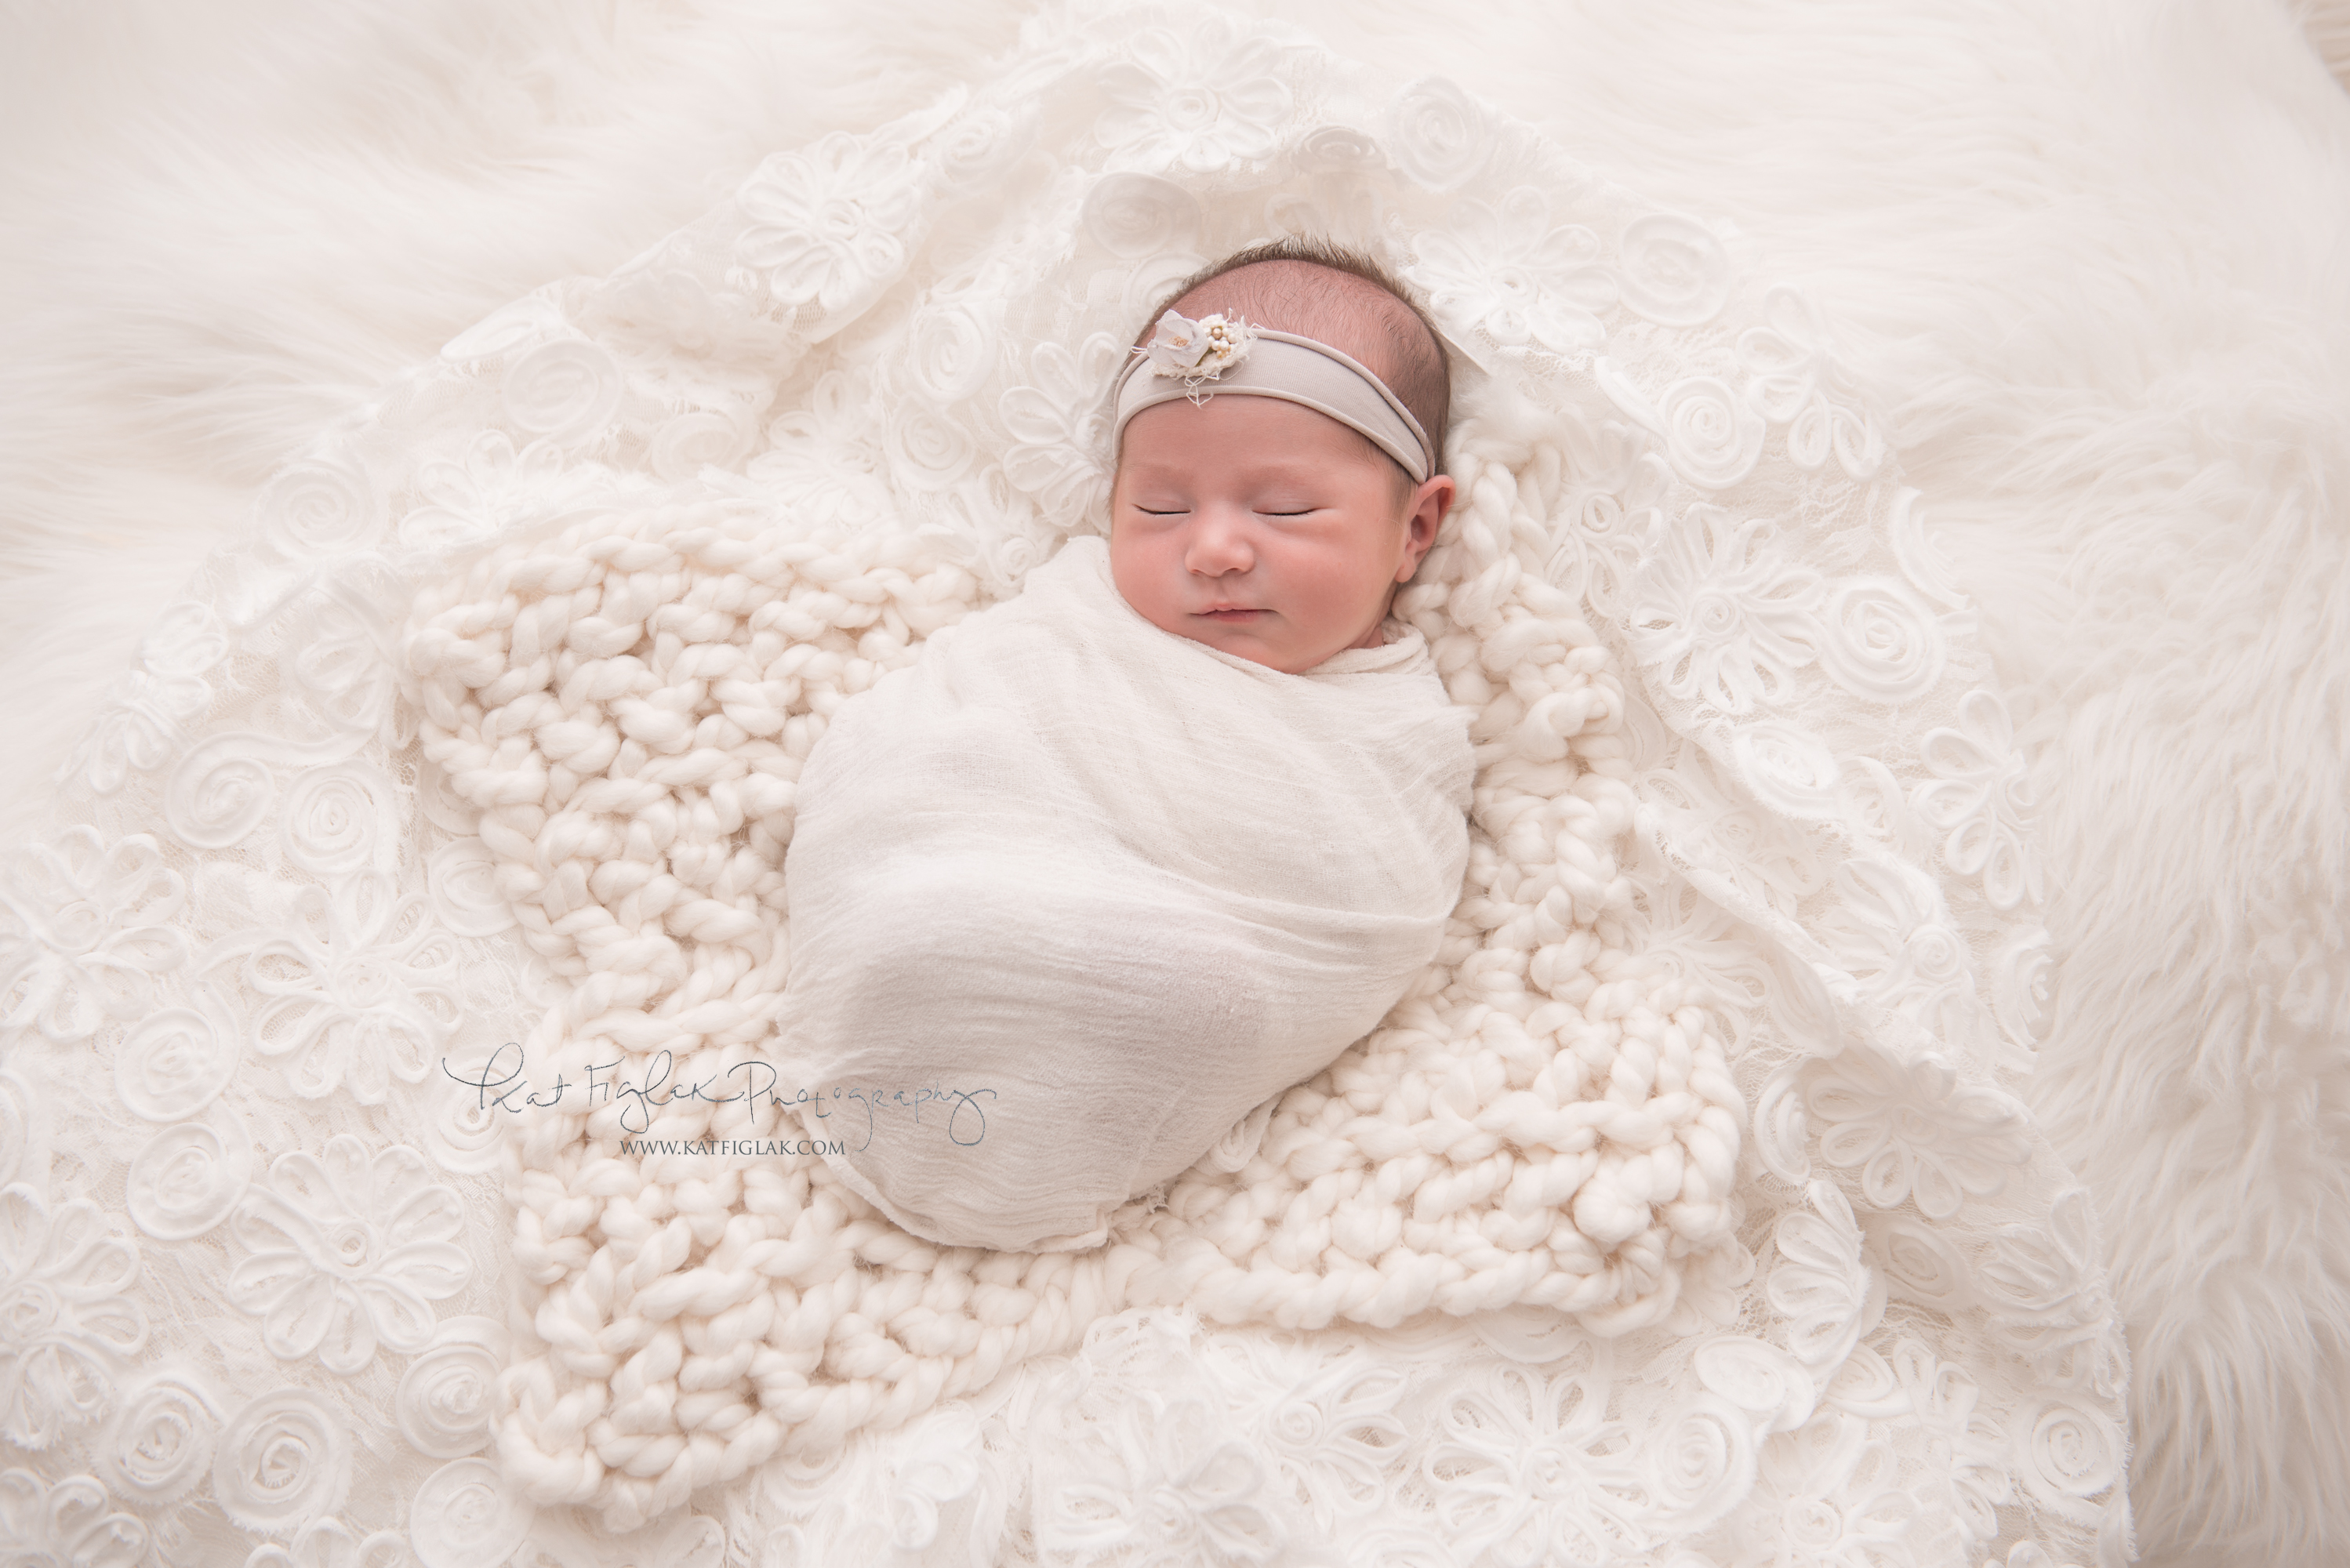 Newborn baby girl smiling and swaddled in white wrap with floral headband on white rug